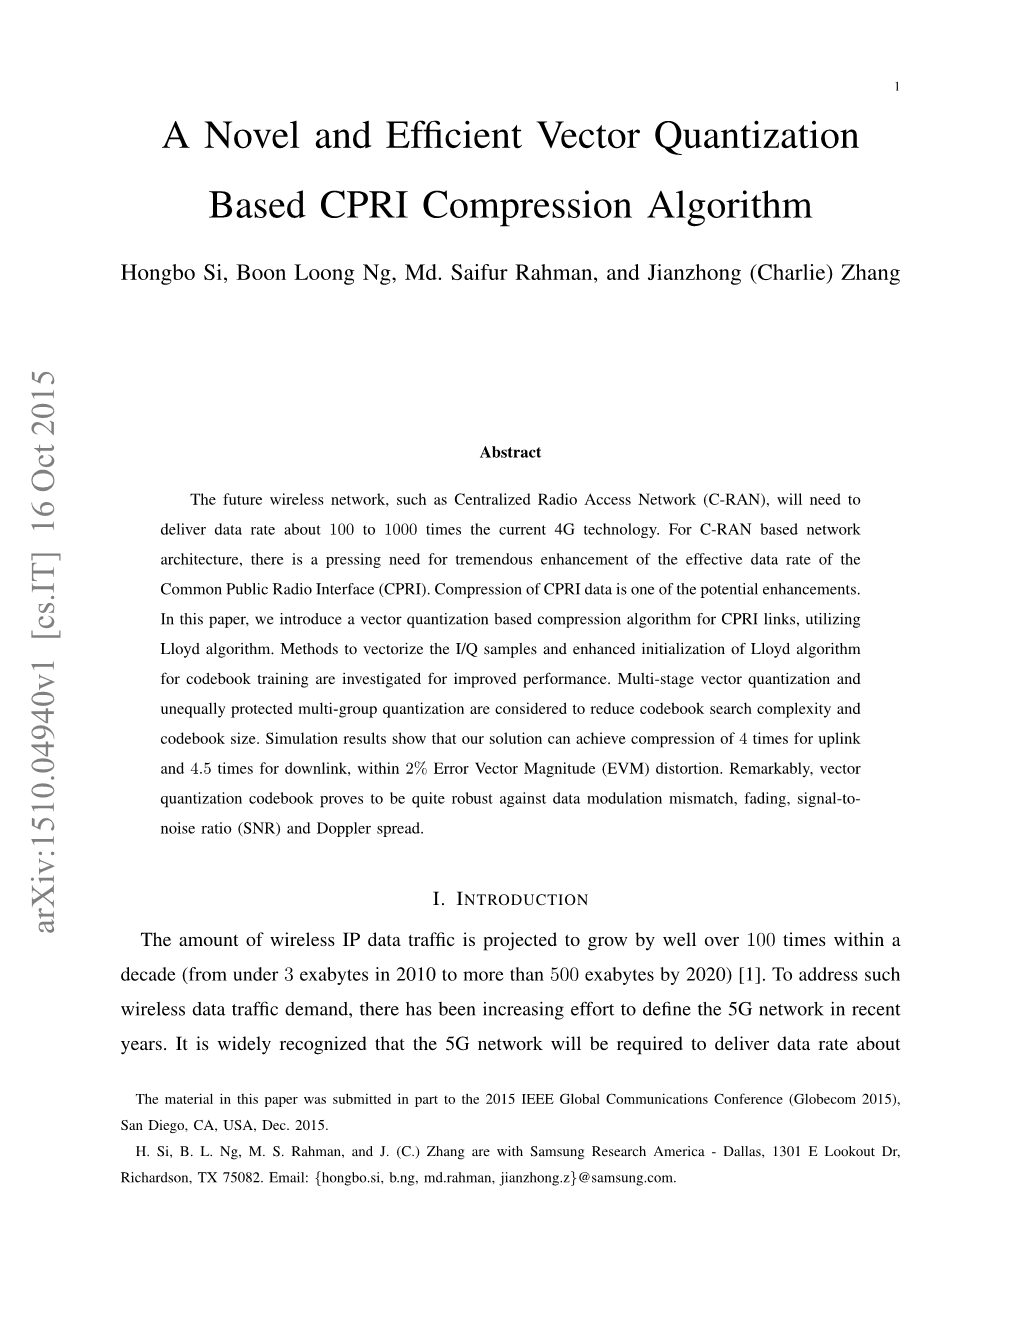 A Novel and Efficient Vector Quantization Based CPRI